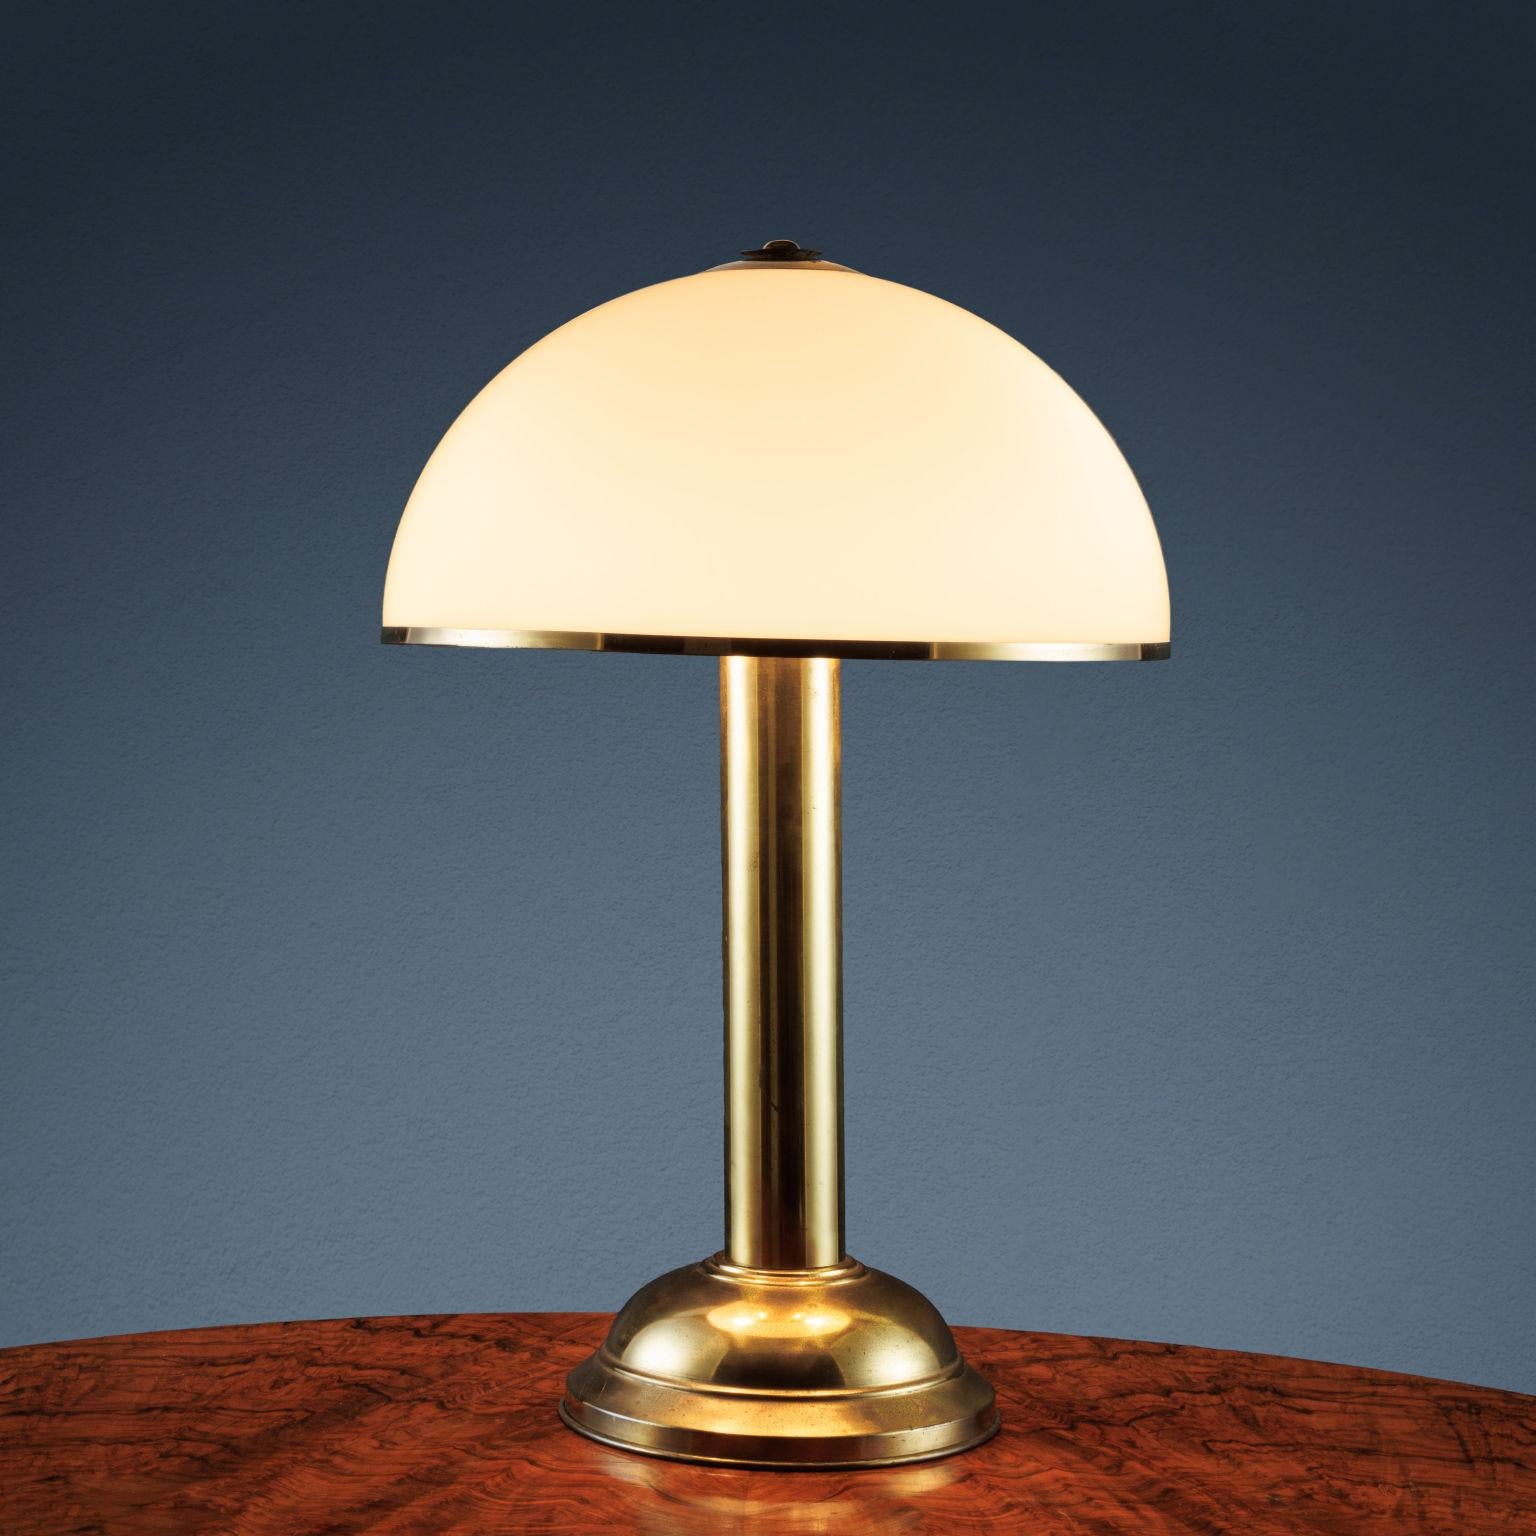 Large table lamp with brass base and methacrylate lampshade; design by Gabriella Crespi, produced around 1970.